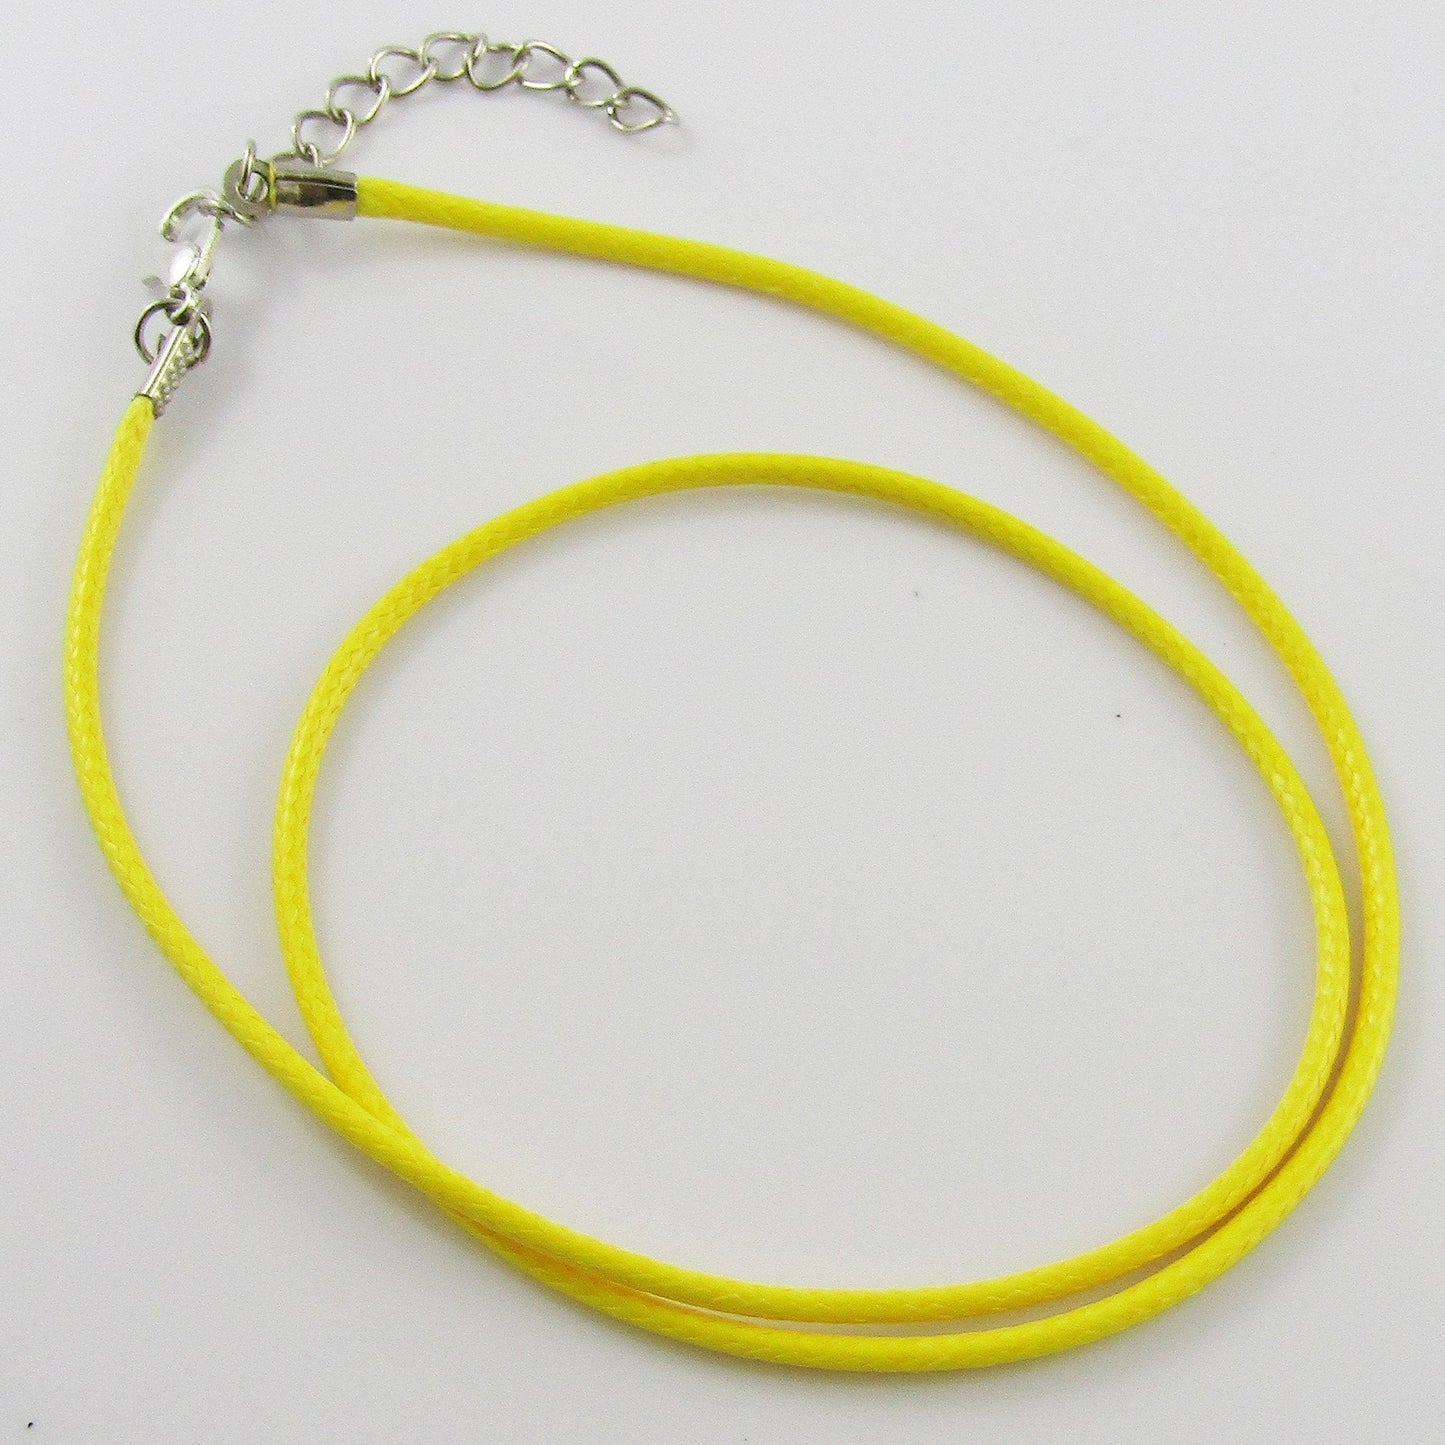 Bulk Pack 10pcs 2mm Yellow Cord Necklace 44cm with 5cm Extender